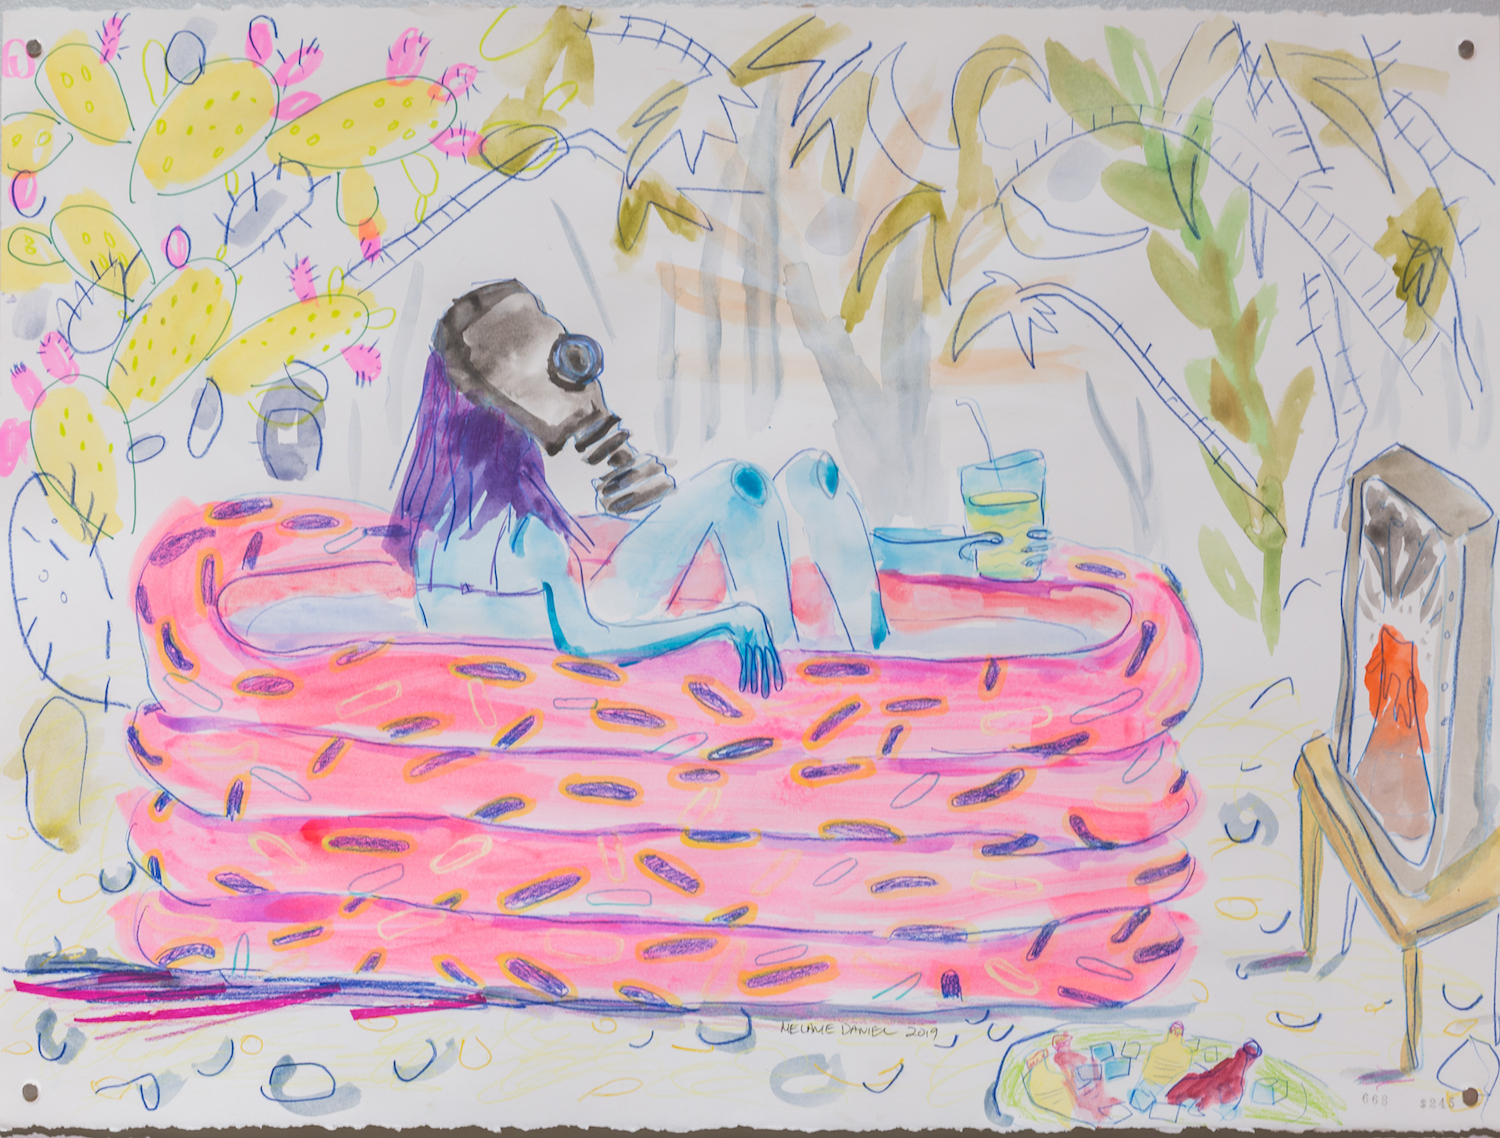 Pool Party, 2019, coloured pencil and ink on paper, 11 X 14 inches